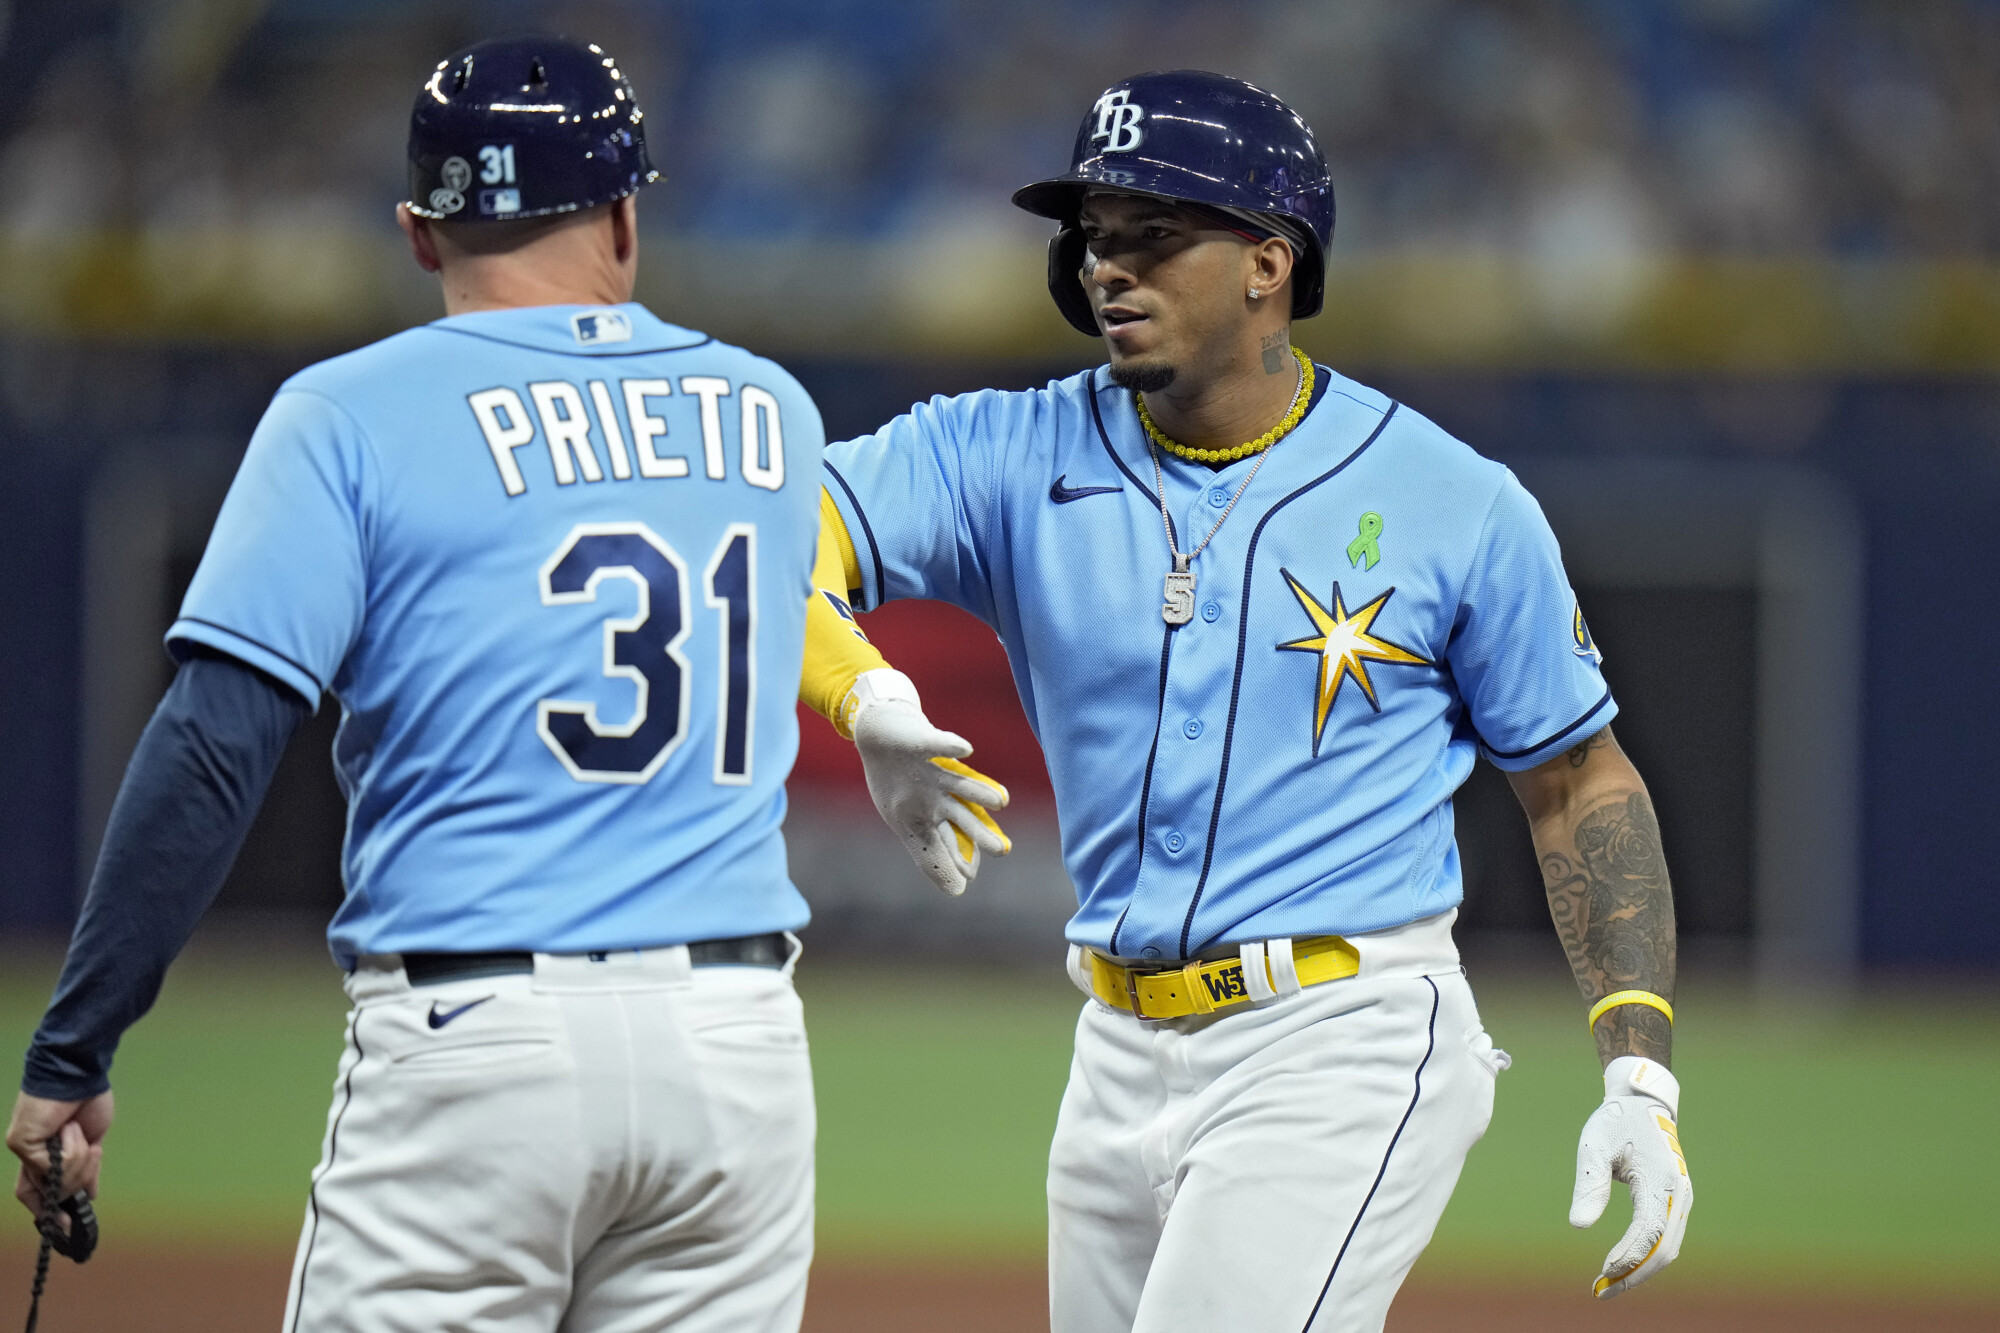 Rays take Round 1 from Pirates in matchup of majors' best